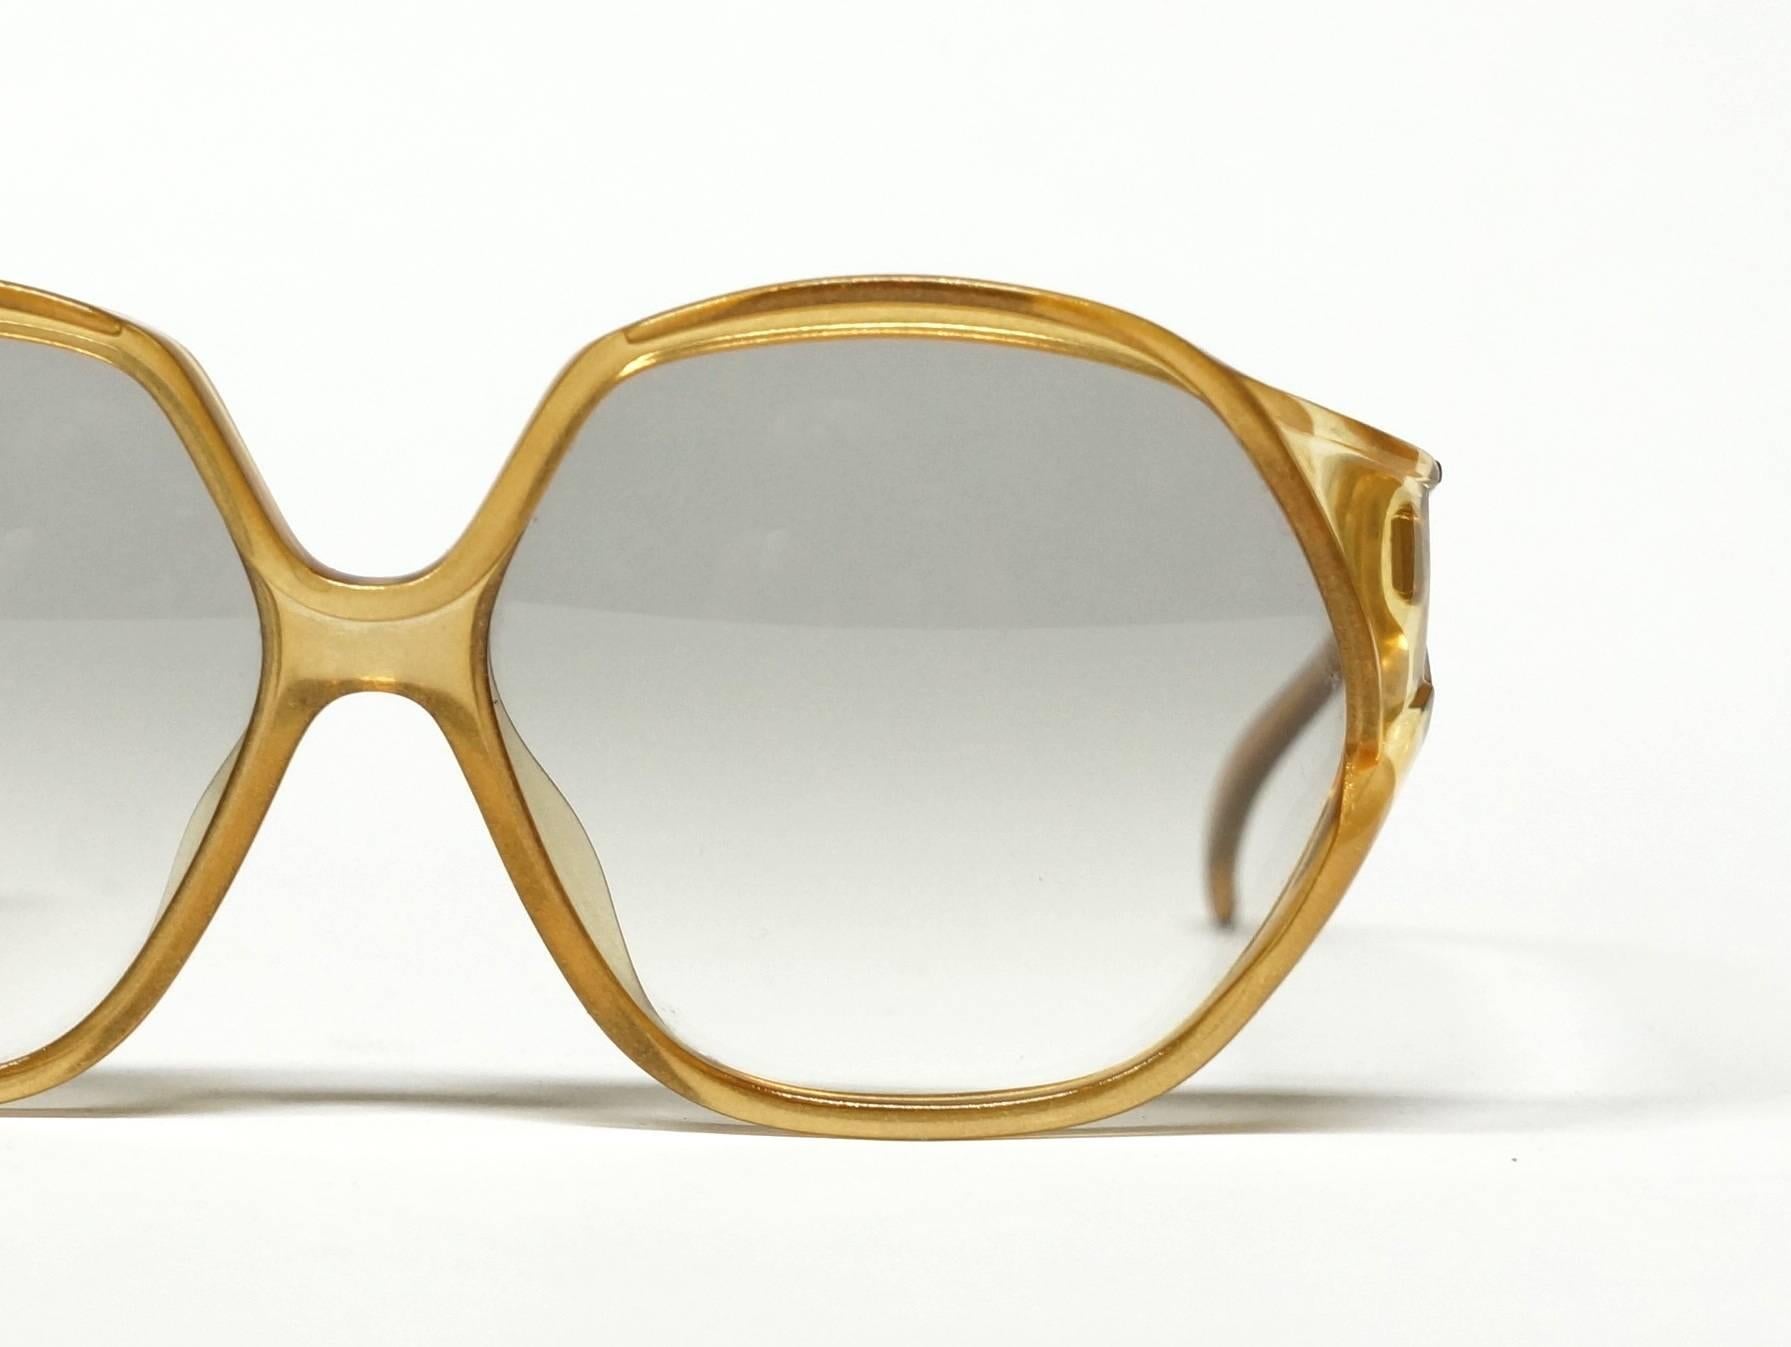 1970s Dior Oversized Sunglasses in New Old Stock Condition For Sale 3